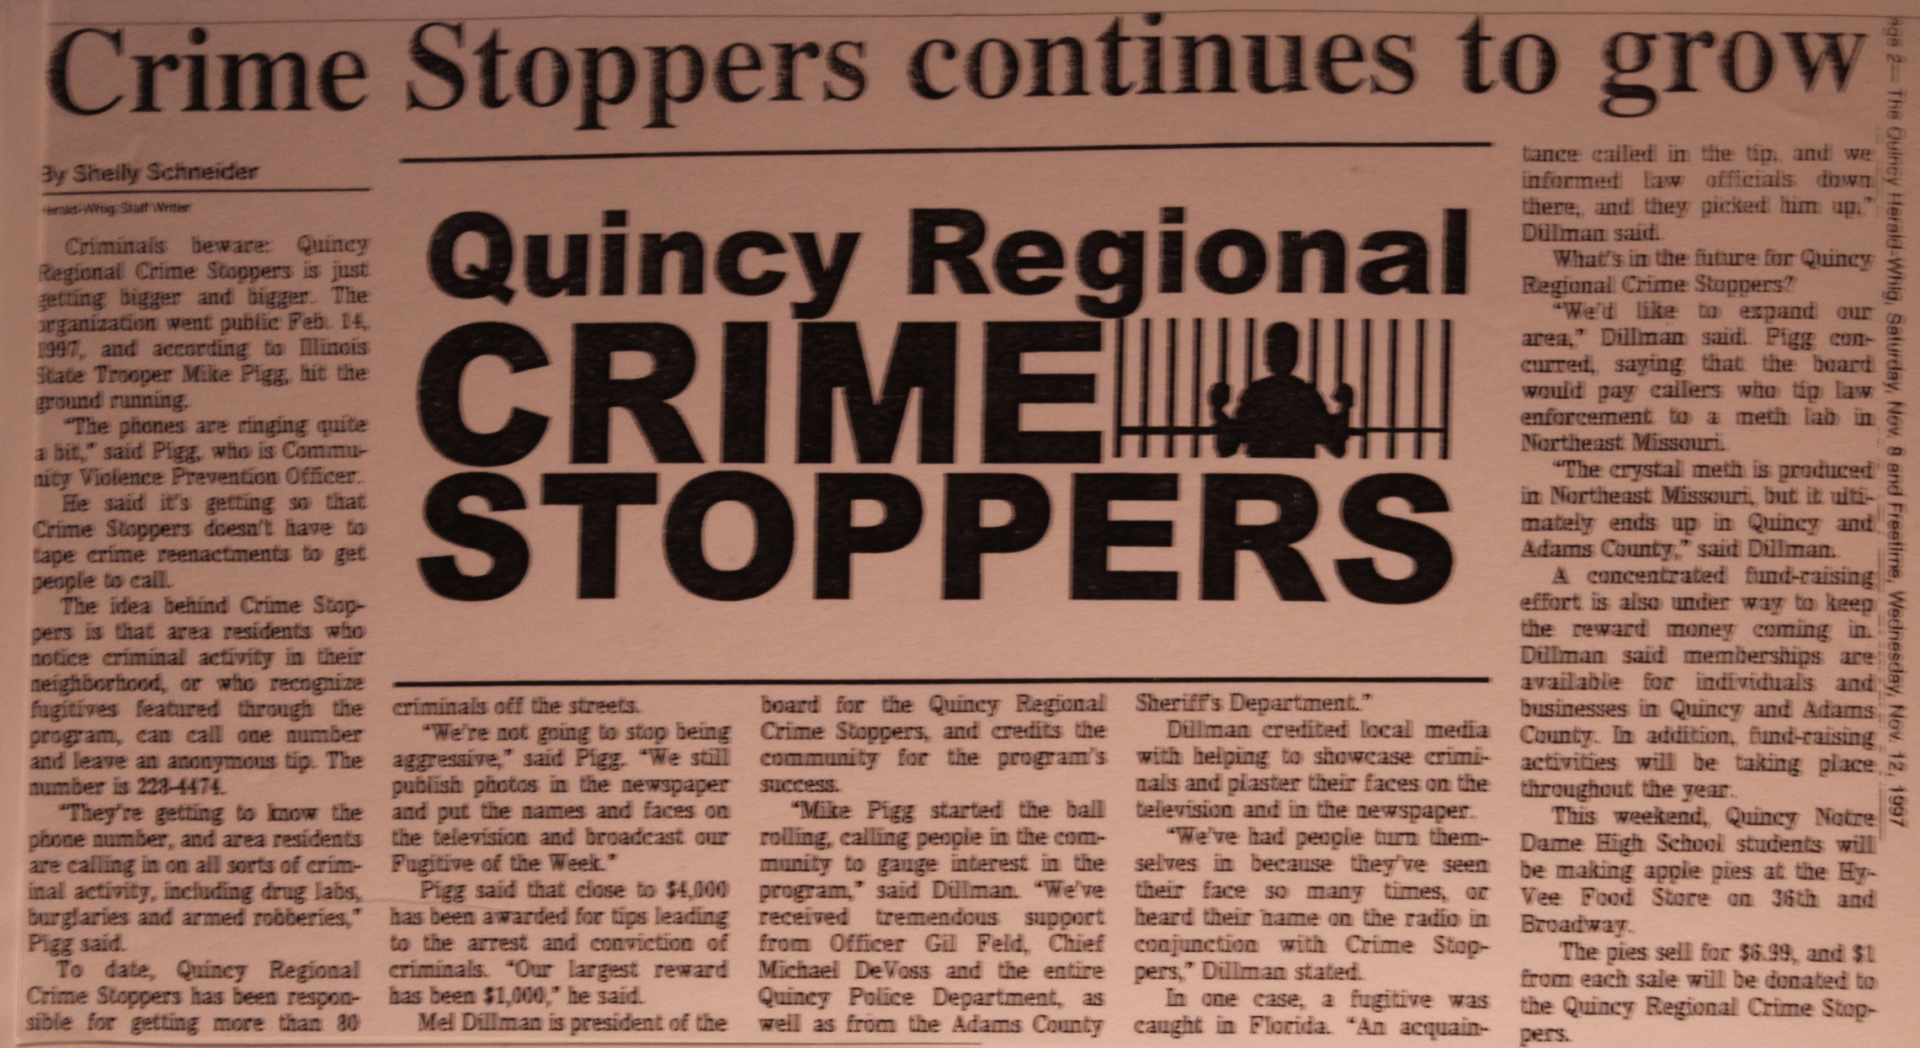 Quincy Crime Stoppers Newspapers